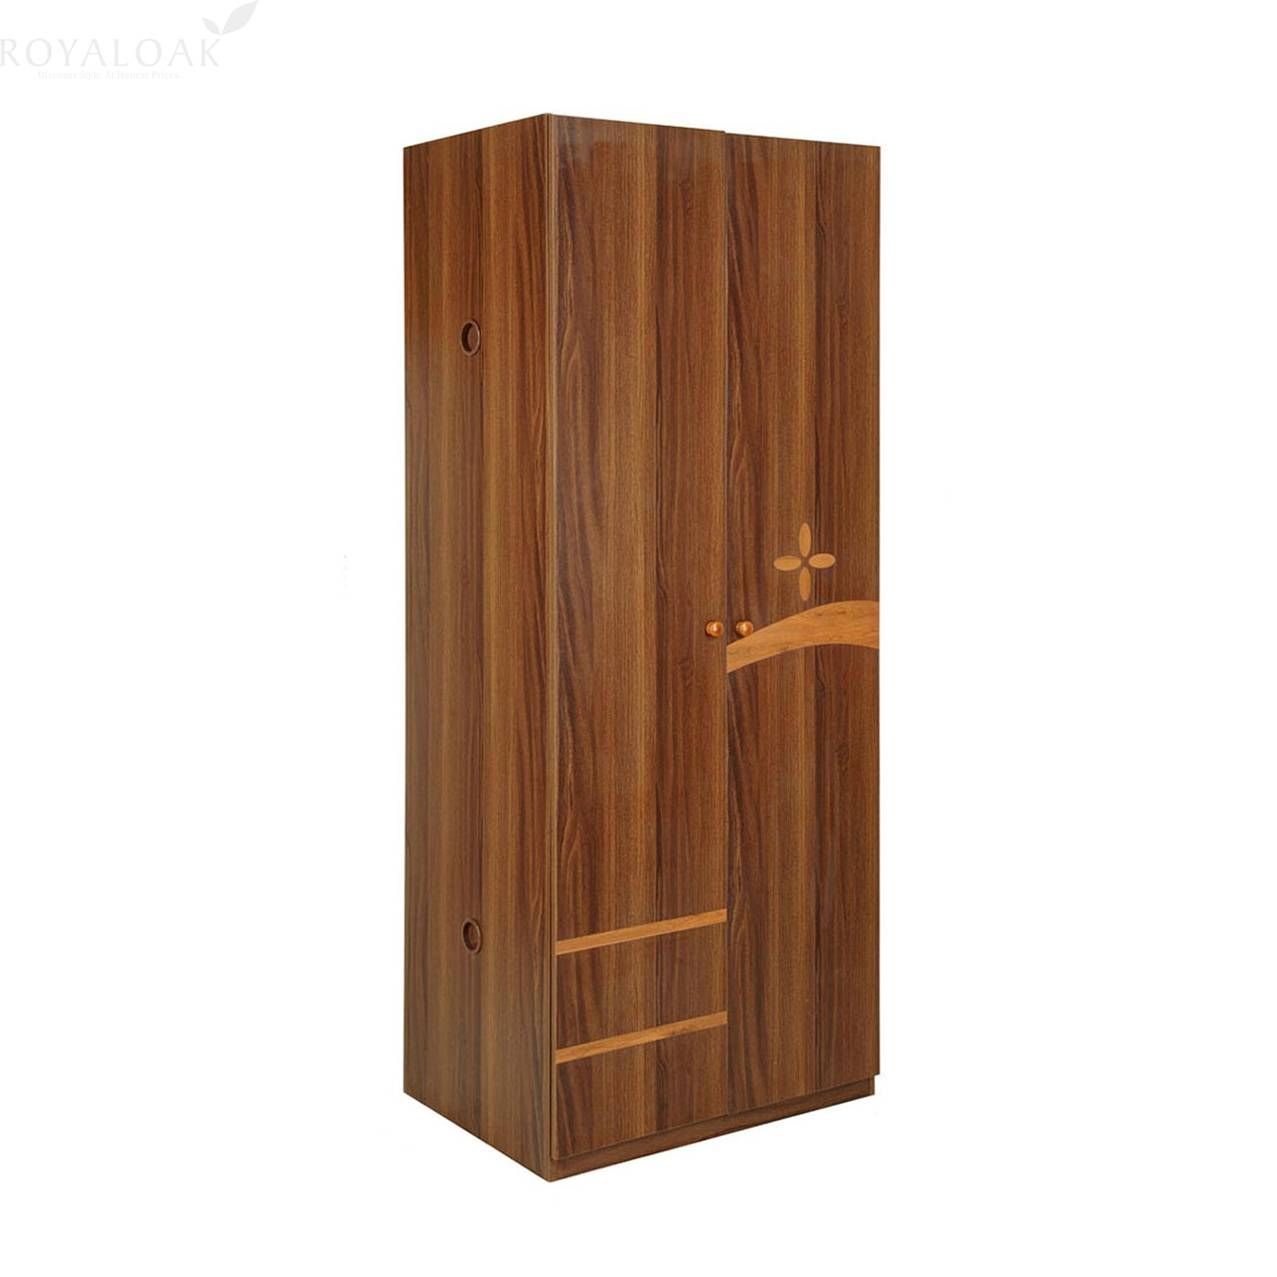 Buy Royaloak Daisy Wardrobe 2dronline In India – Bedroom With Brown Wardrobes (View 12 of 15)